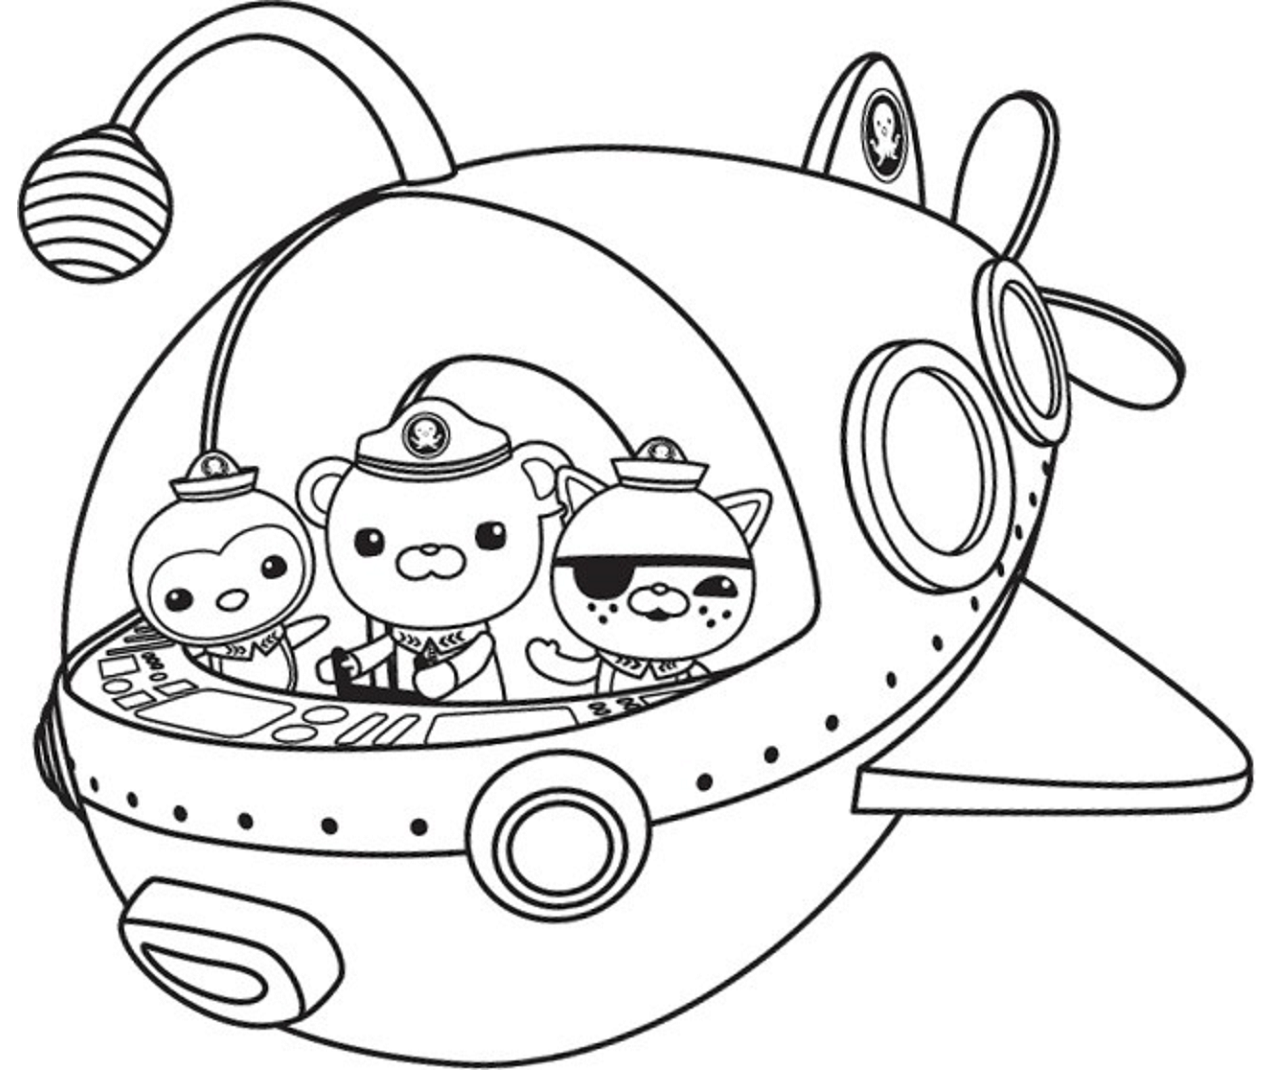 Peso, Captain, Kwazii In Octonauts Ship Coloring Page - Free Printable